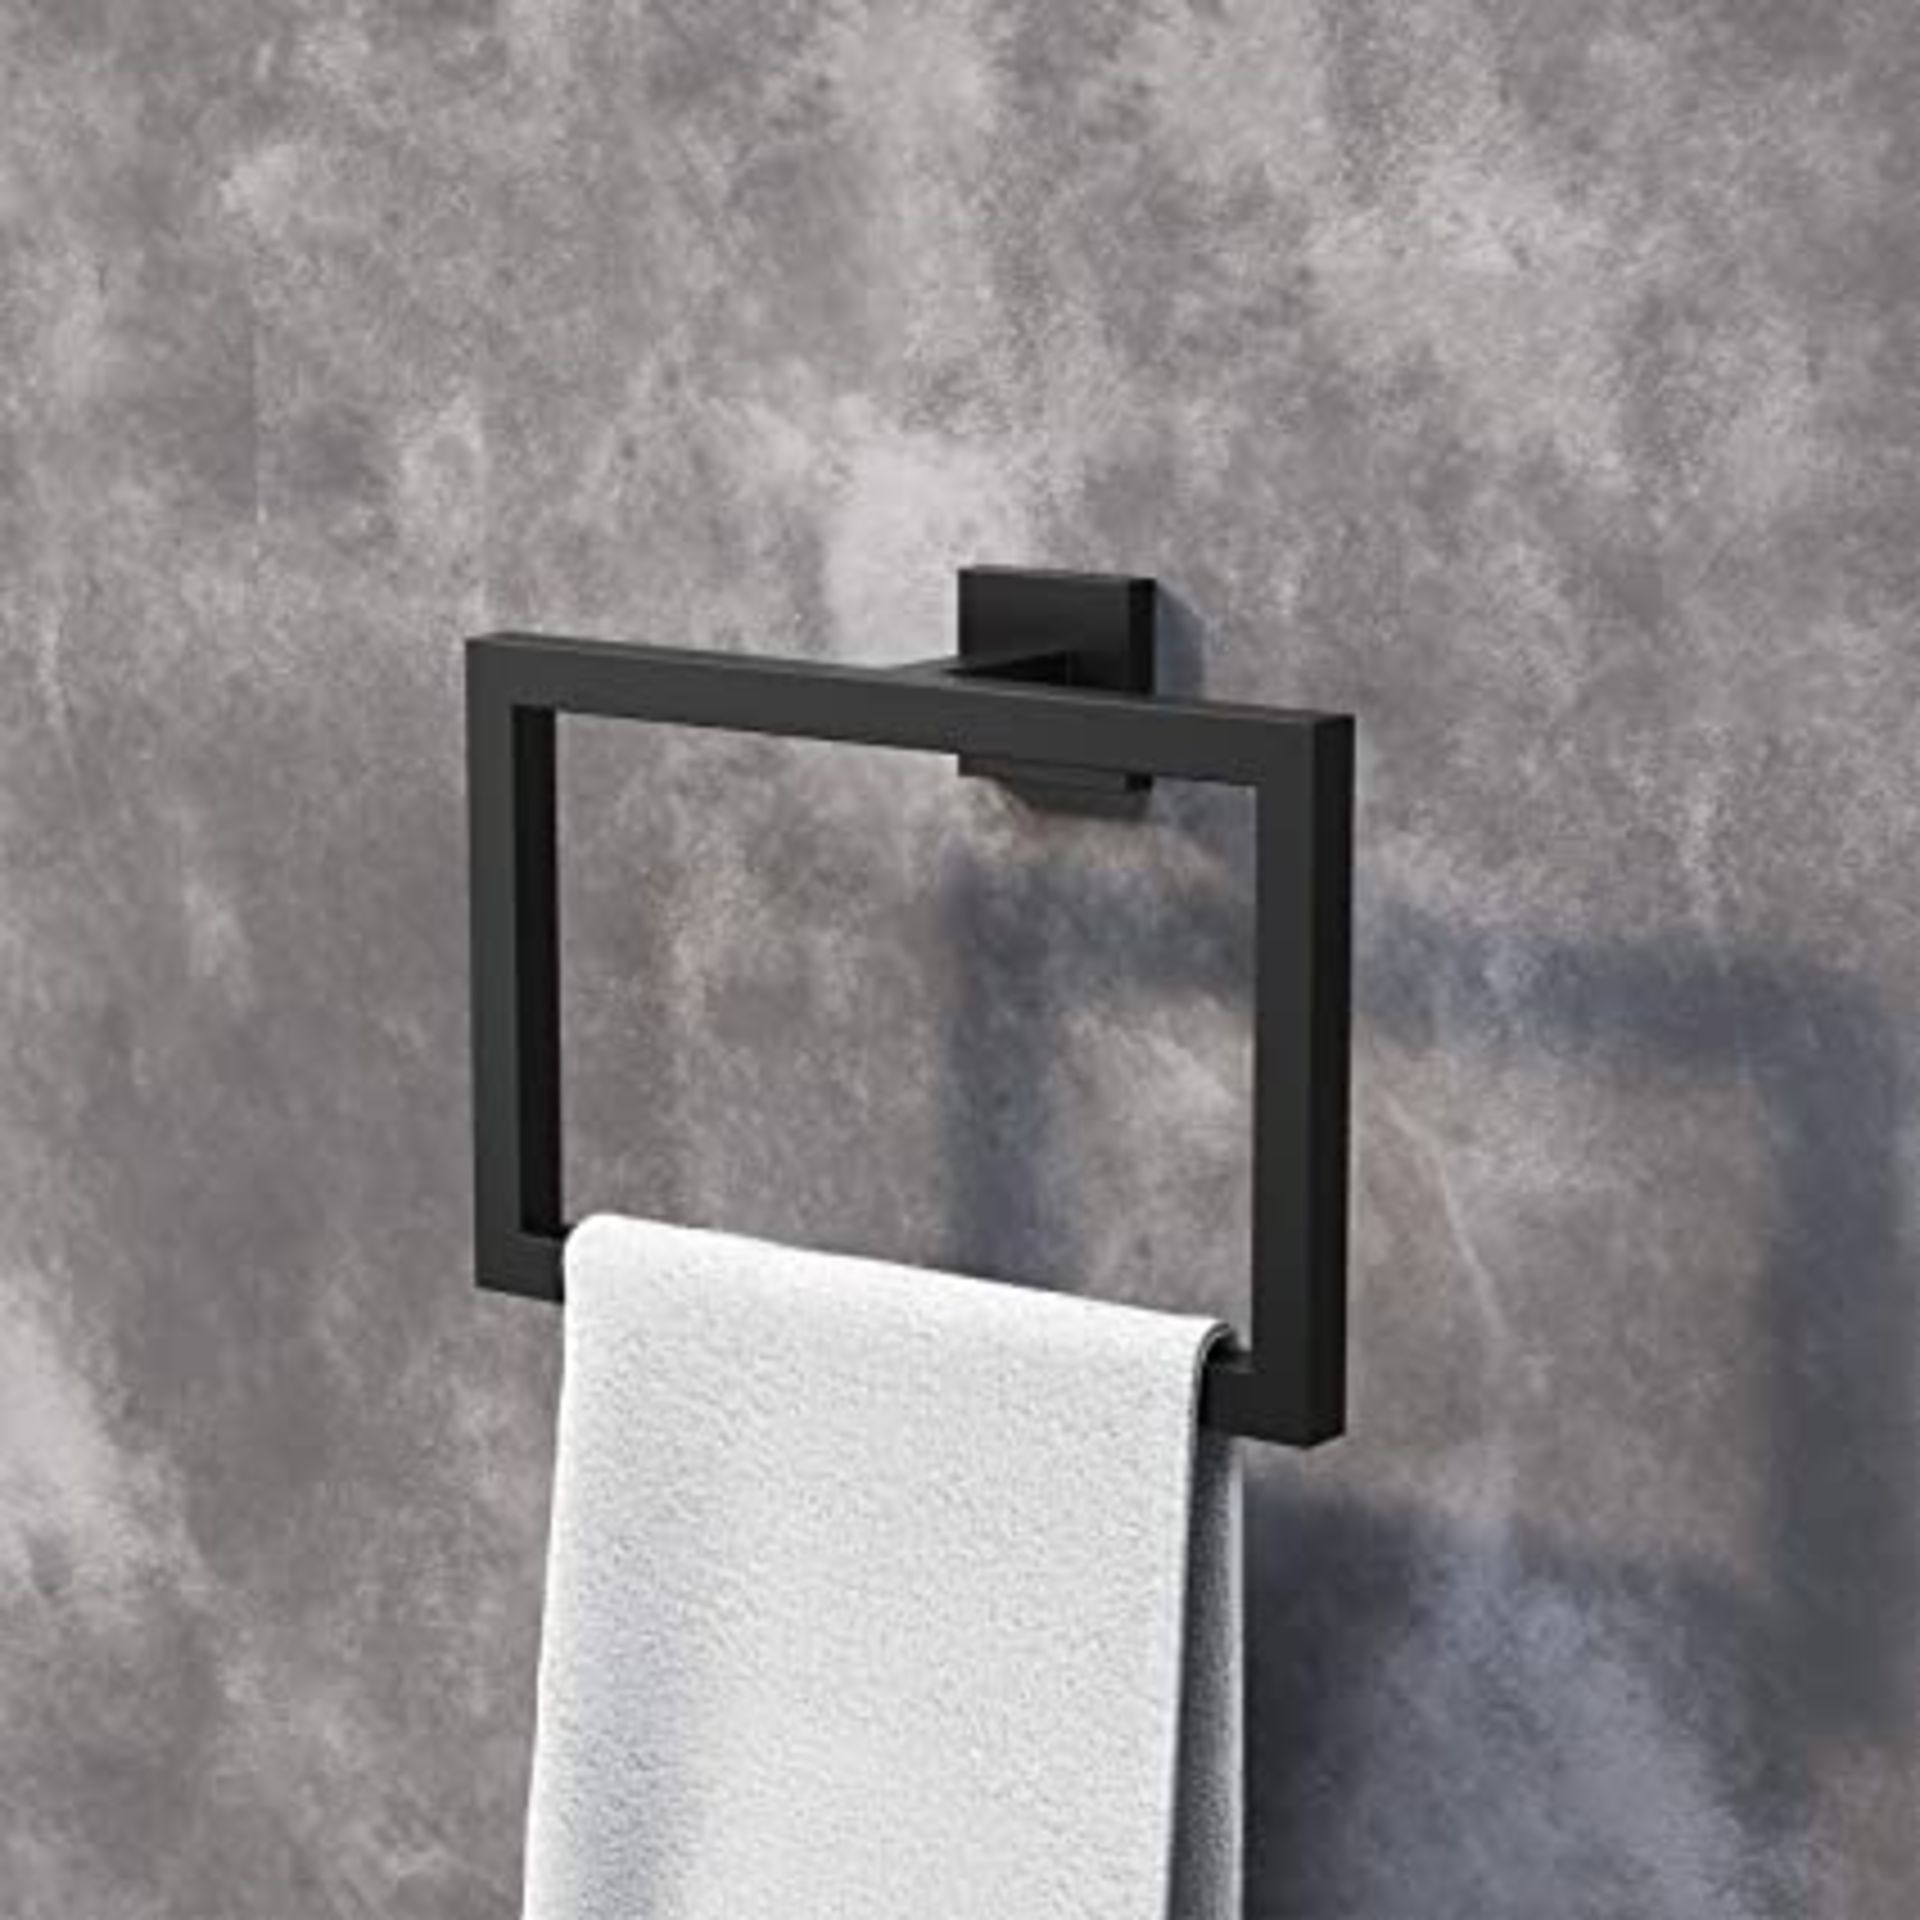 (MG1016) Jesmond Black Towel Ring. Finishes your bathroom with a little extra functionality and...